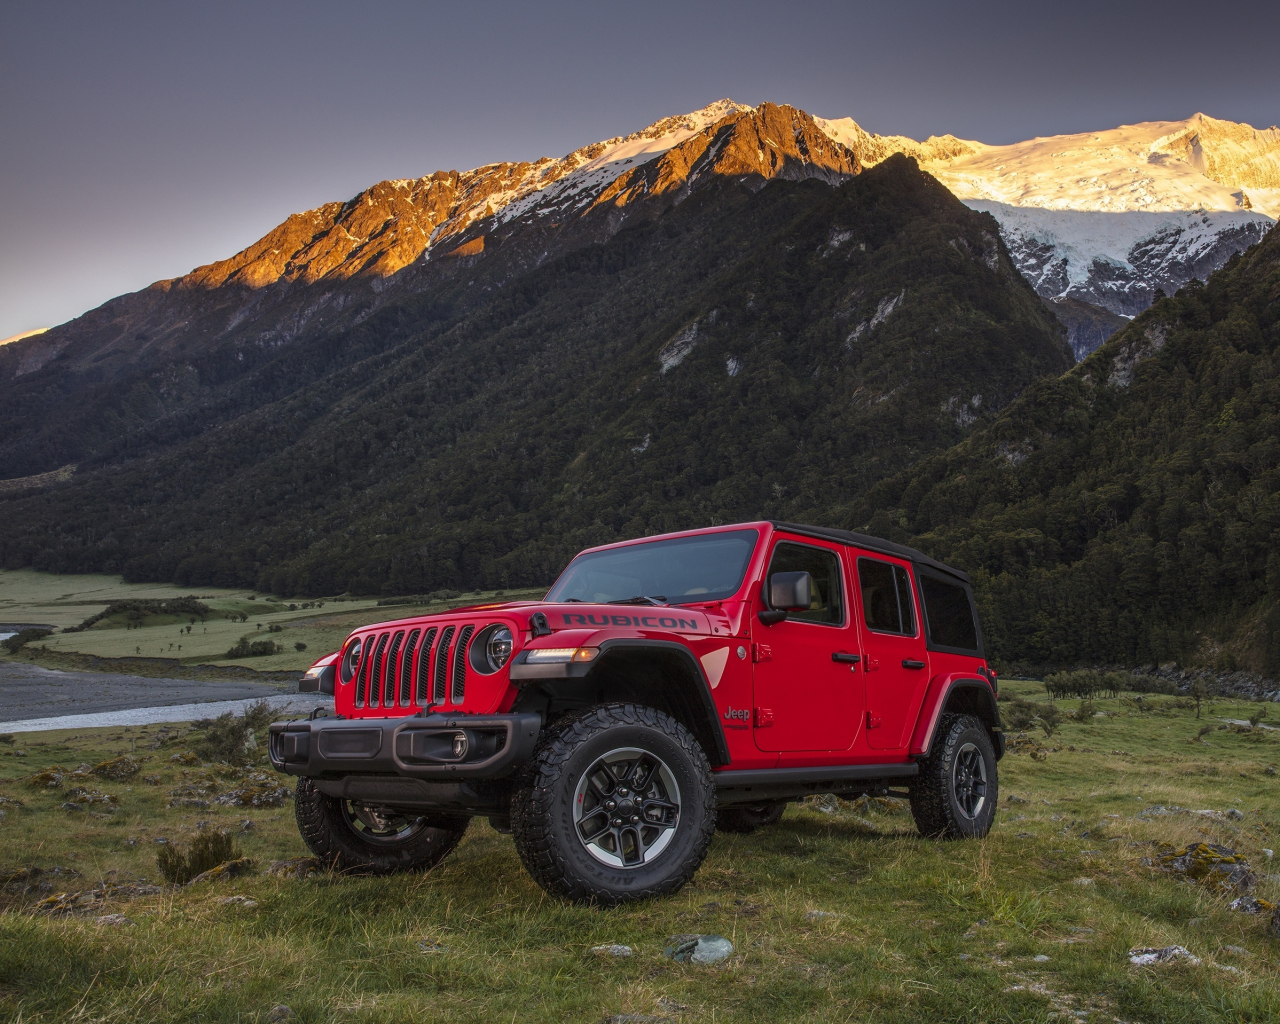 Download red 4x4 suv jeep wrangler 1280x1024 wallpaper